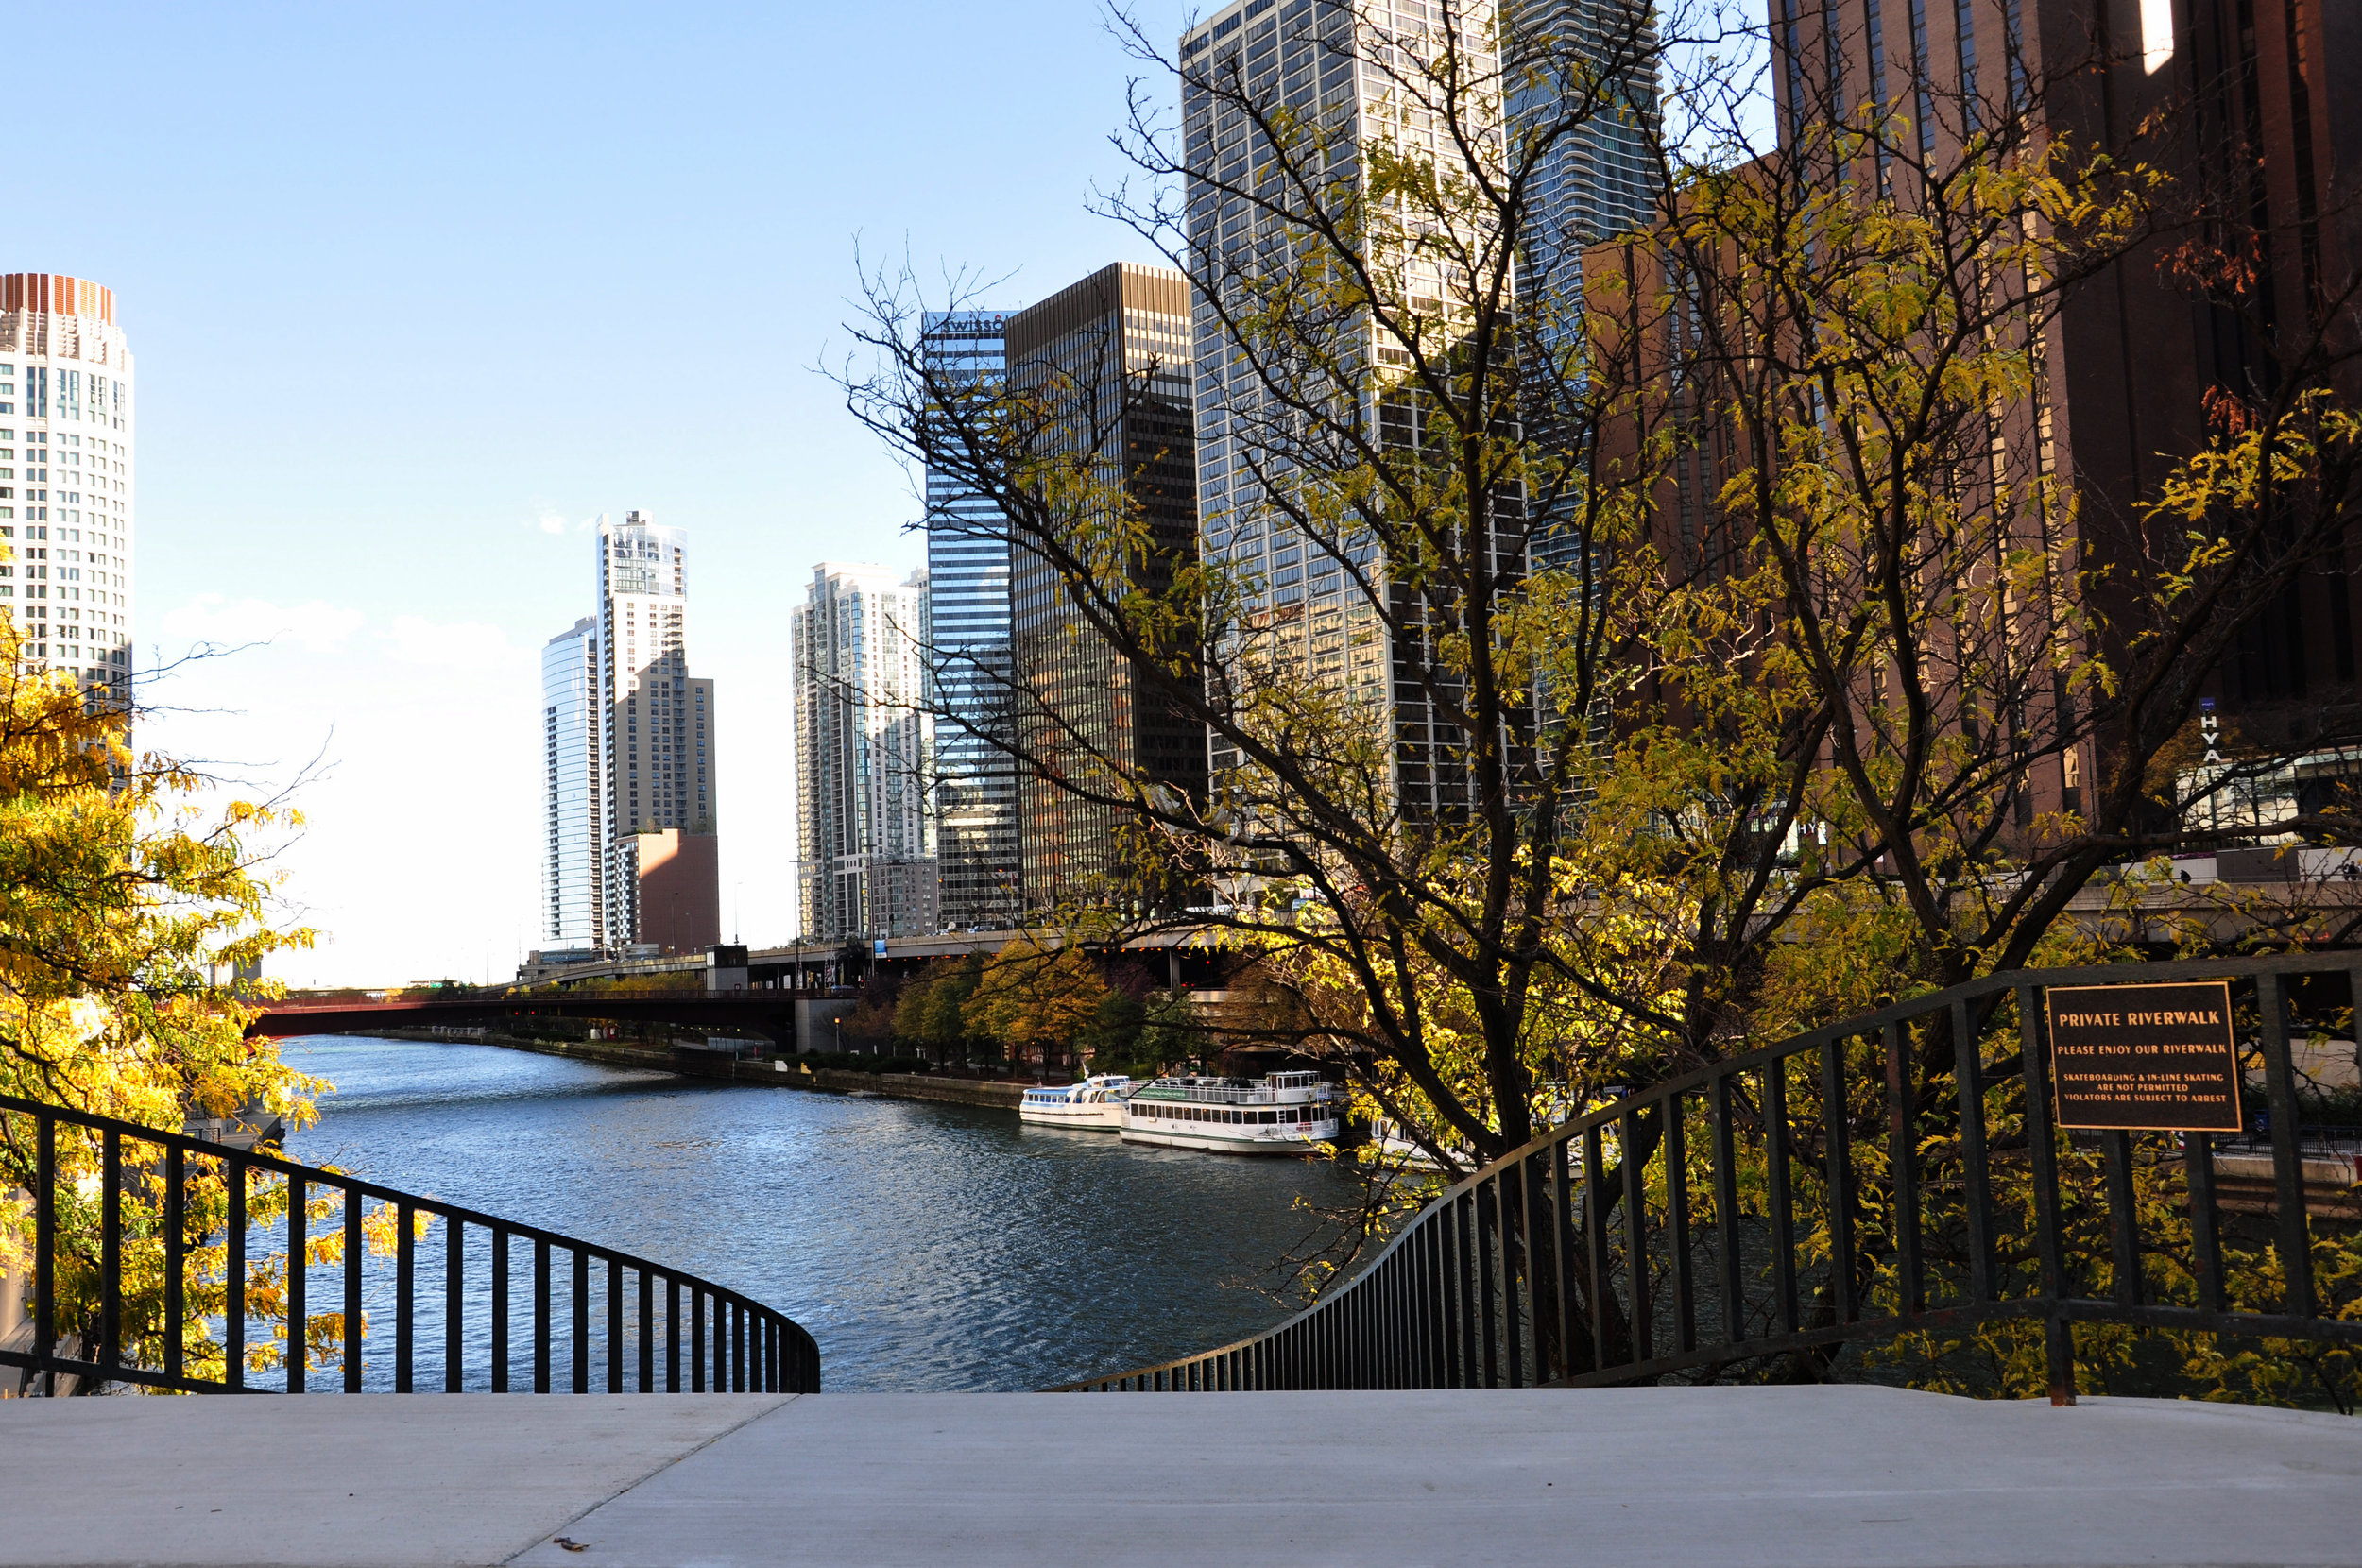 custom renovation, commercial historic restoration, concrete stairs, concrete repairs, Chicago Riverwalk River, water taxi, waterways, riverfront